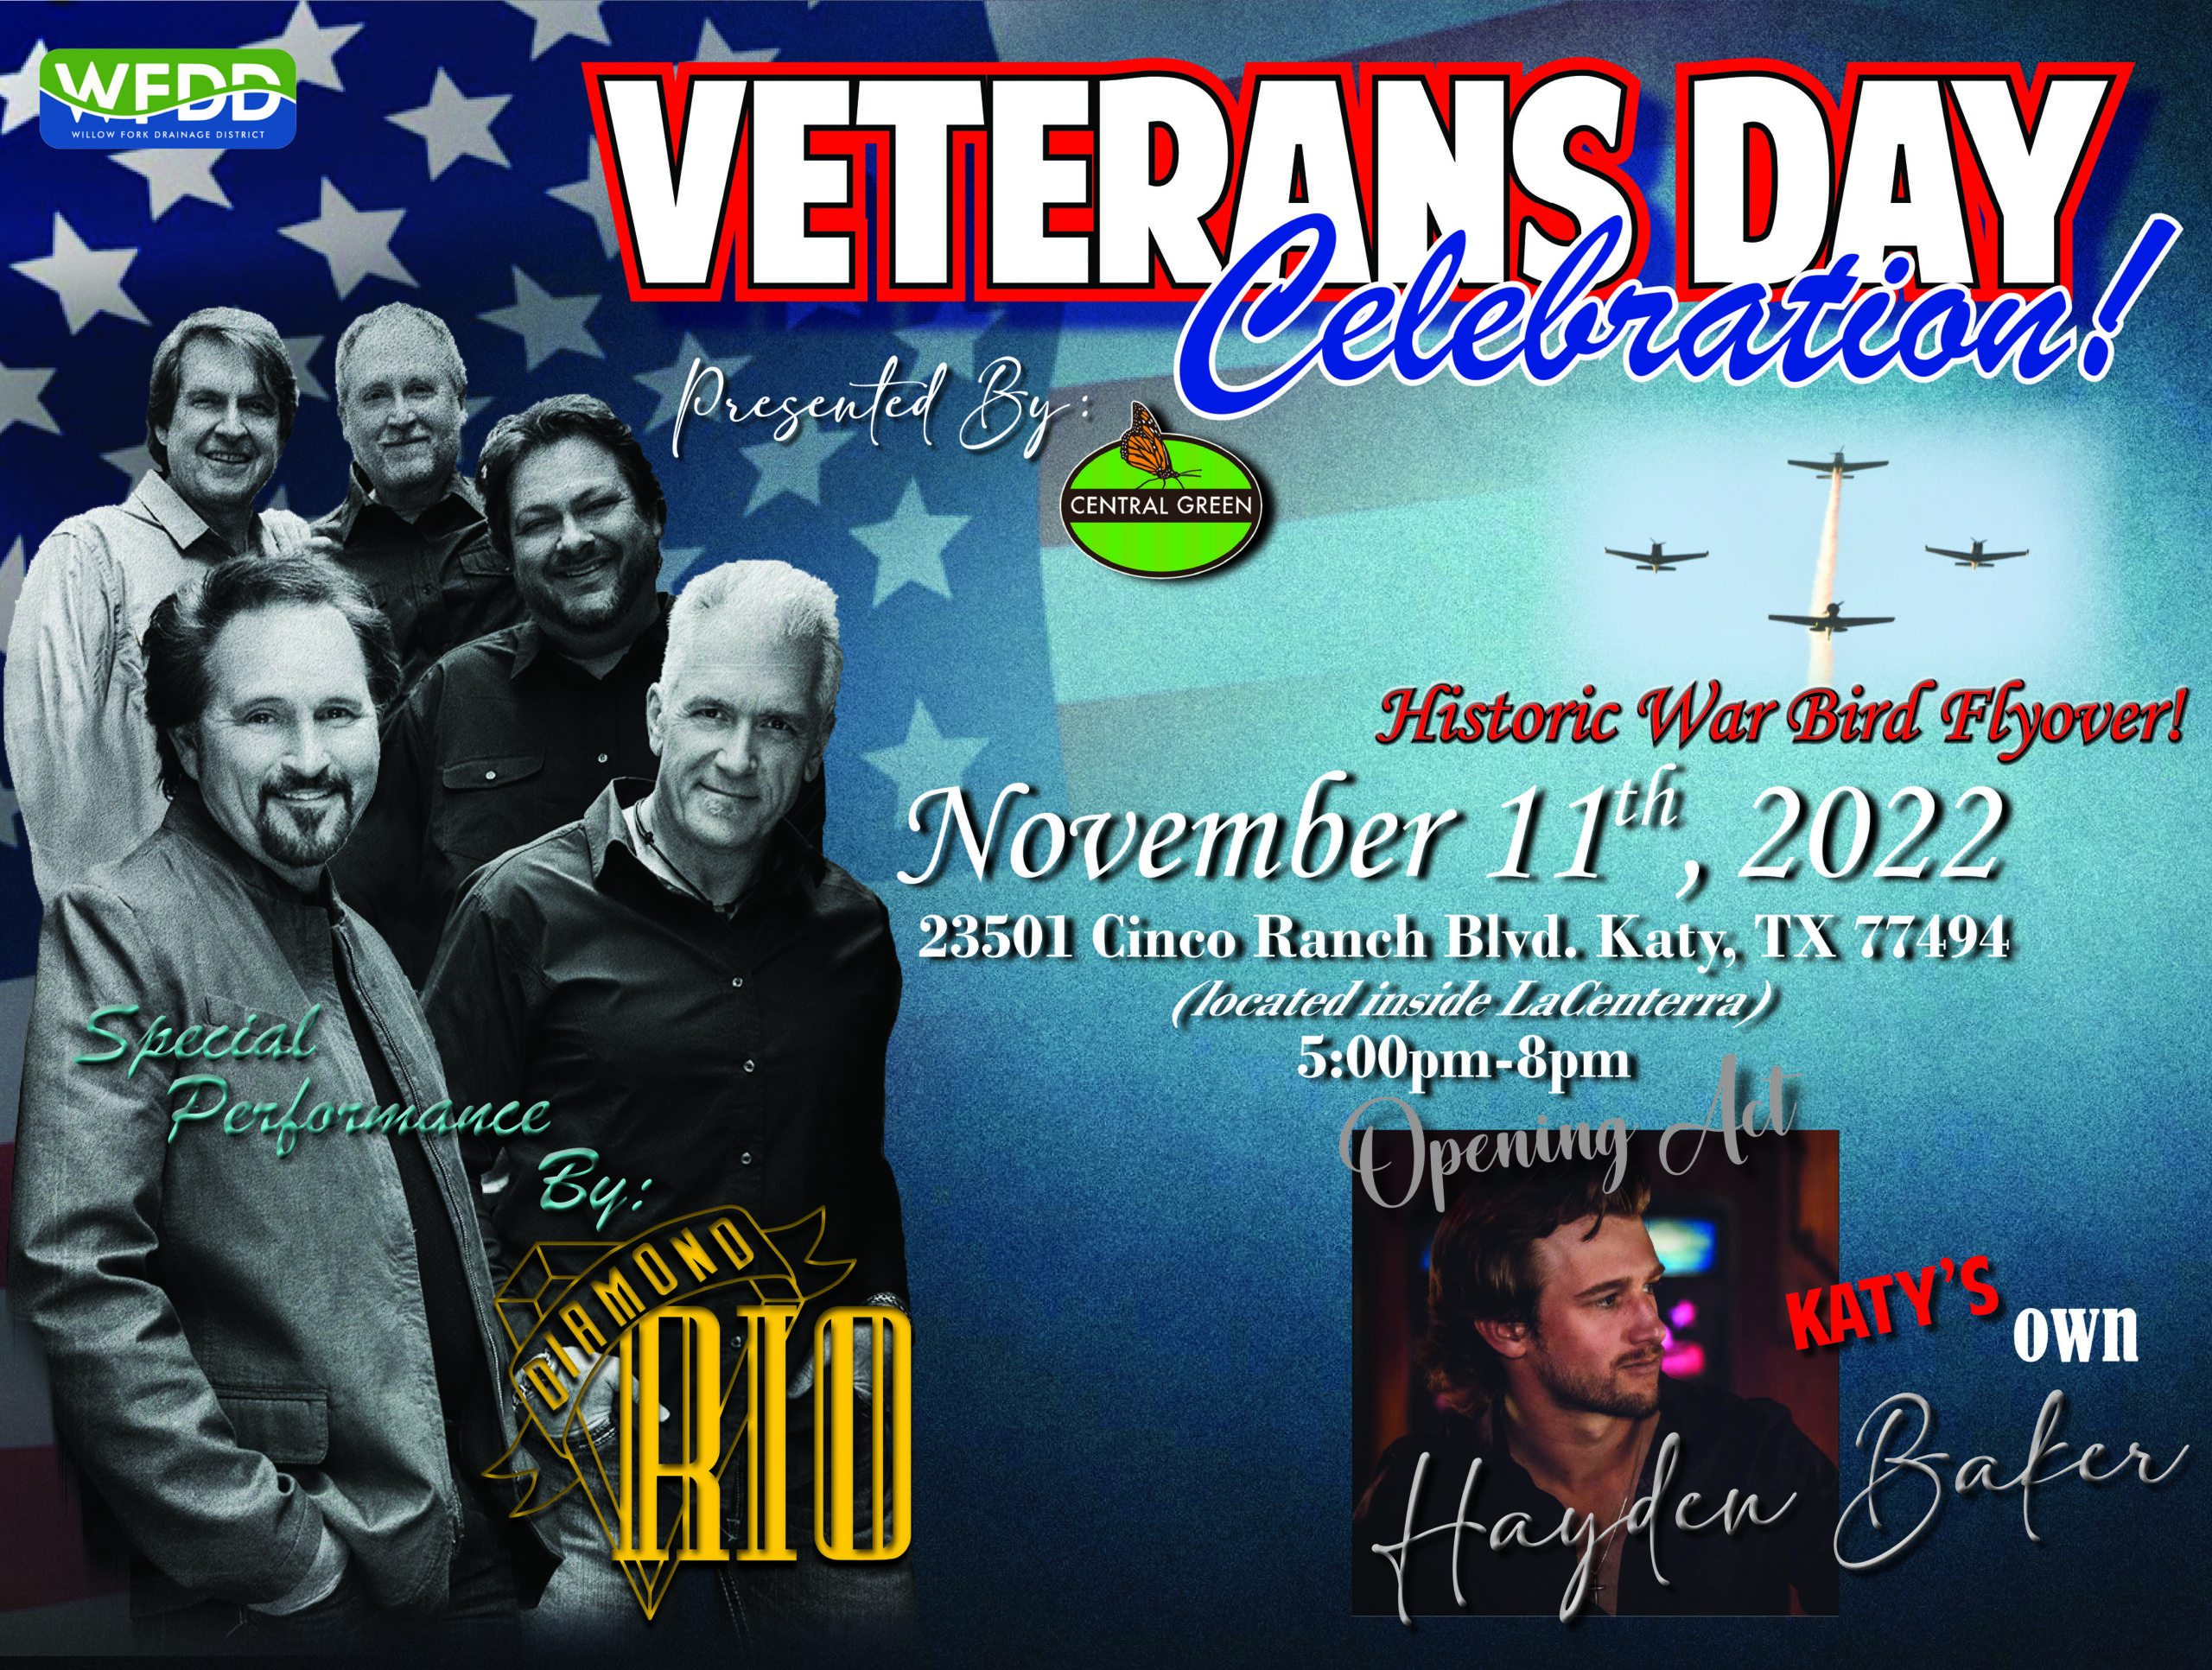 Veterans Day Celebration by Central Green